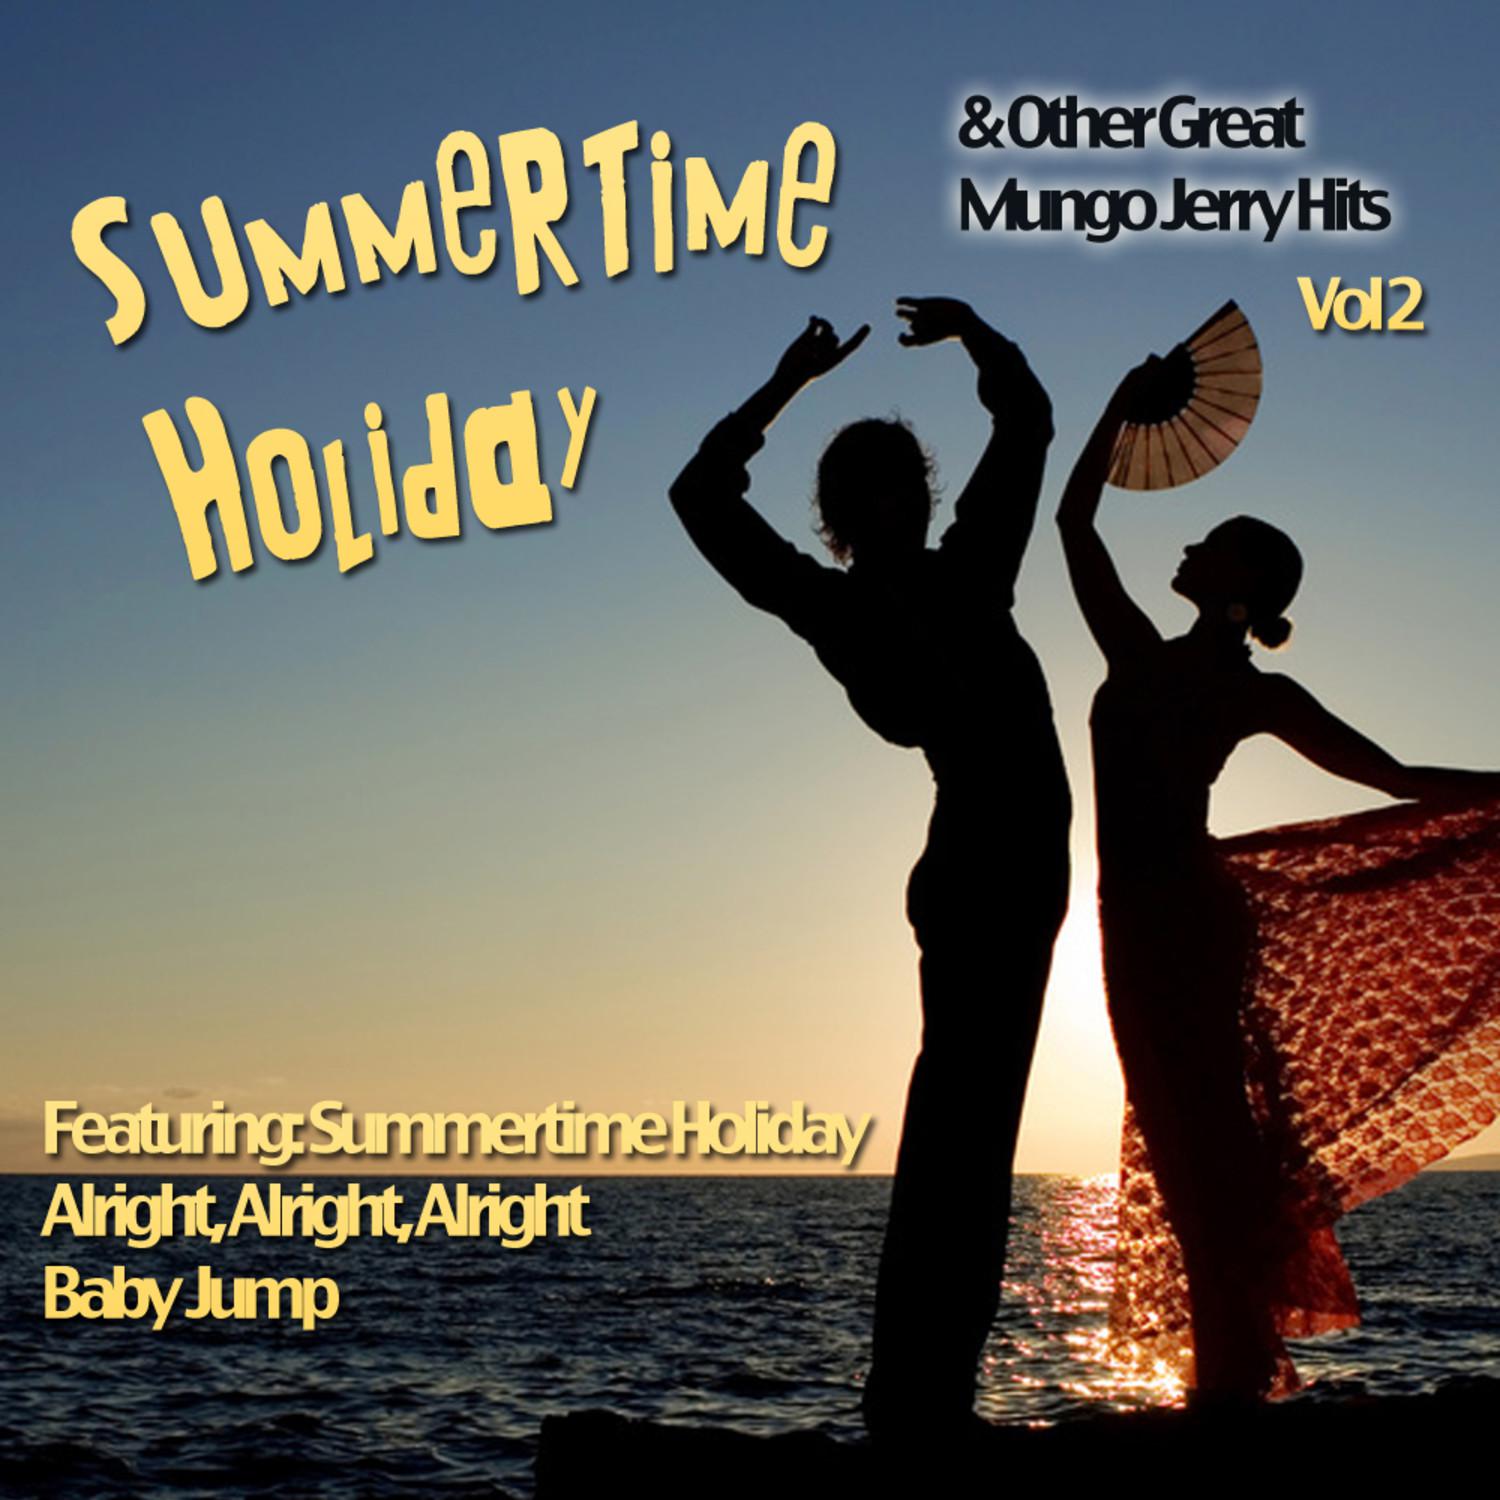 Summertime Holiday And Other Great Mungo Jerry Hits Vol 2